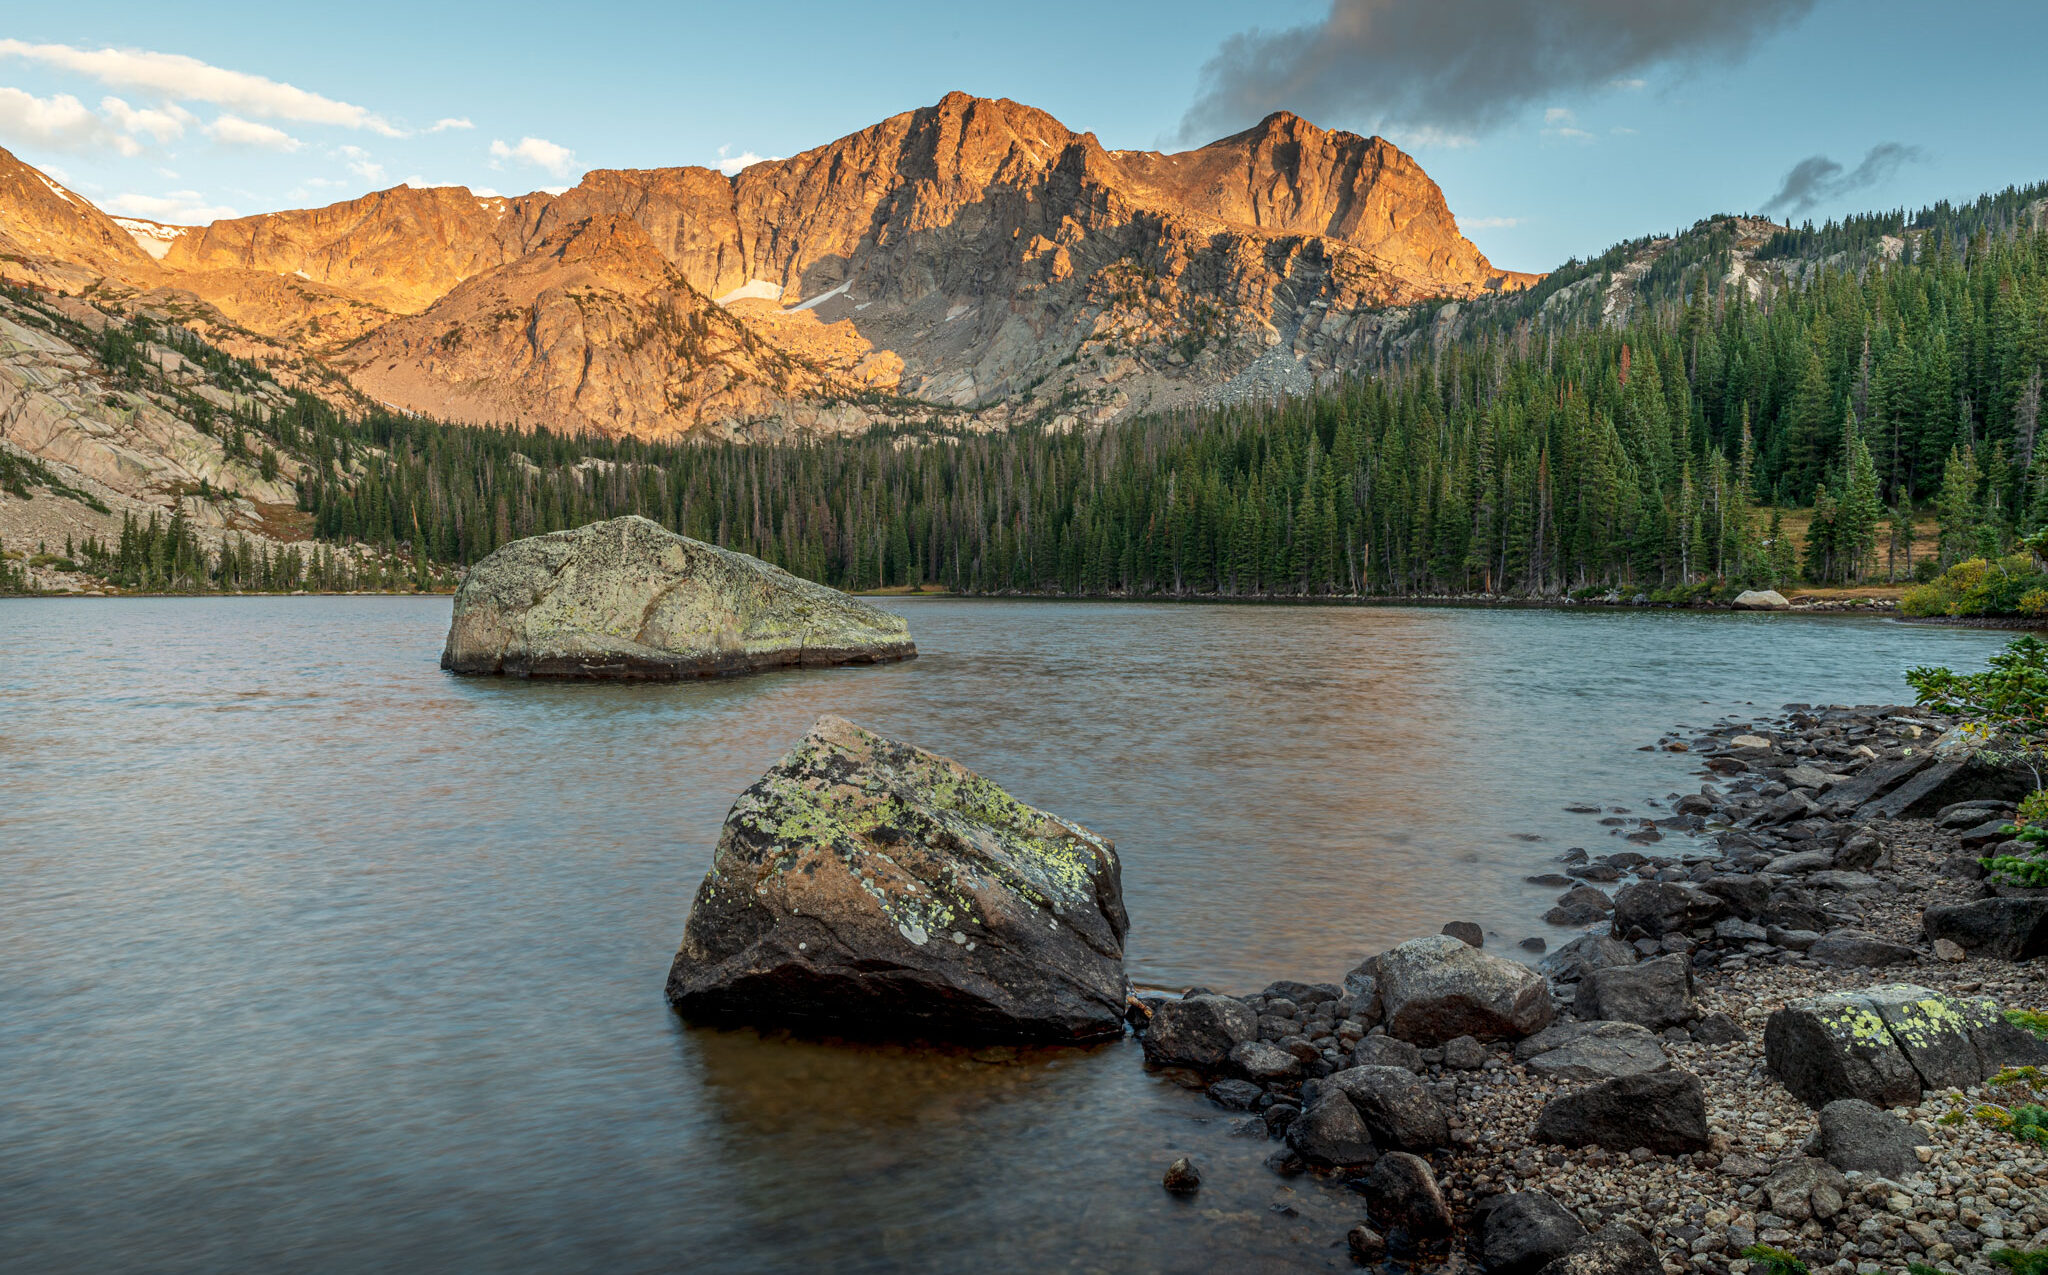 Sunrise at Thunder Lake, from the shore, rocks, lake surrounded by trees, Mt Alice in the background